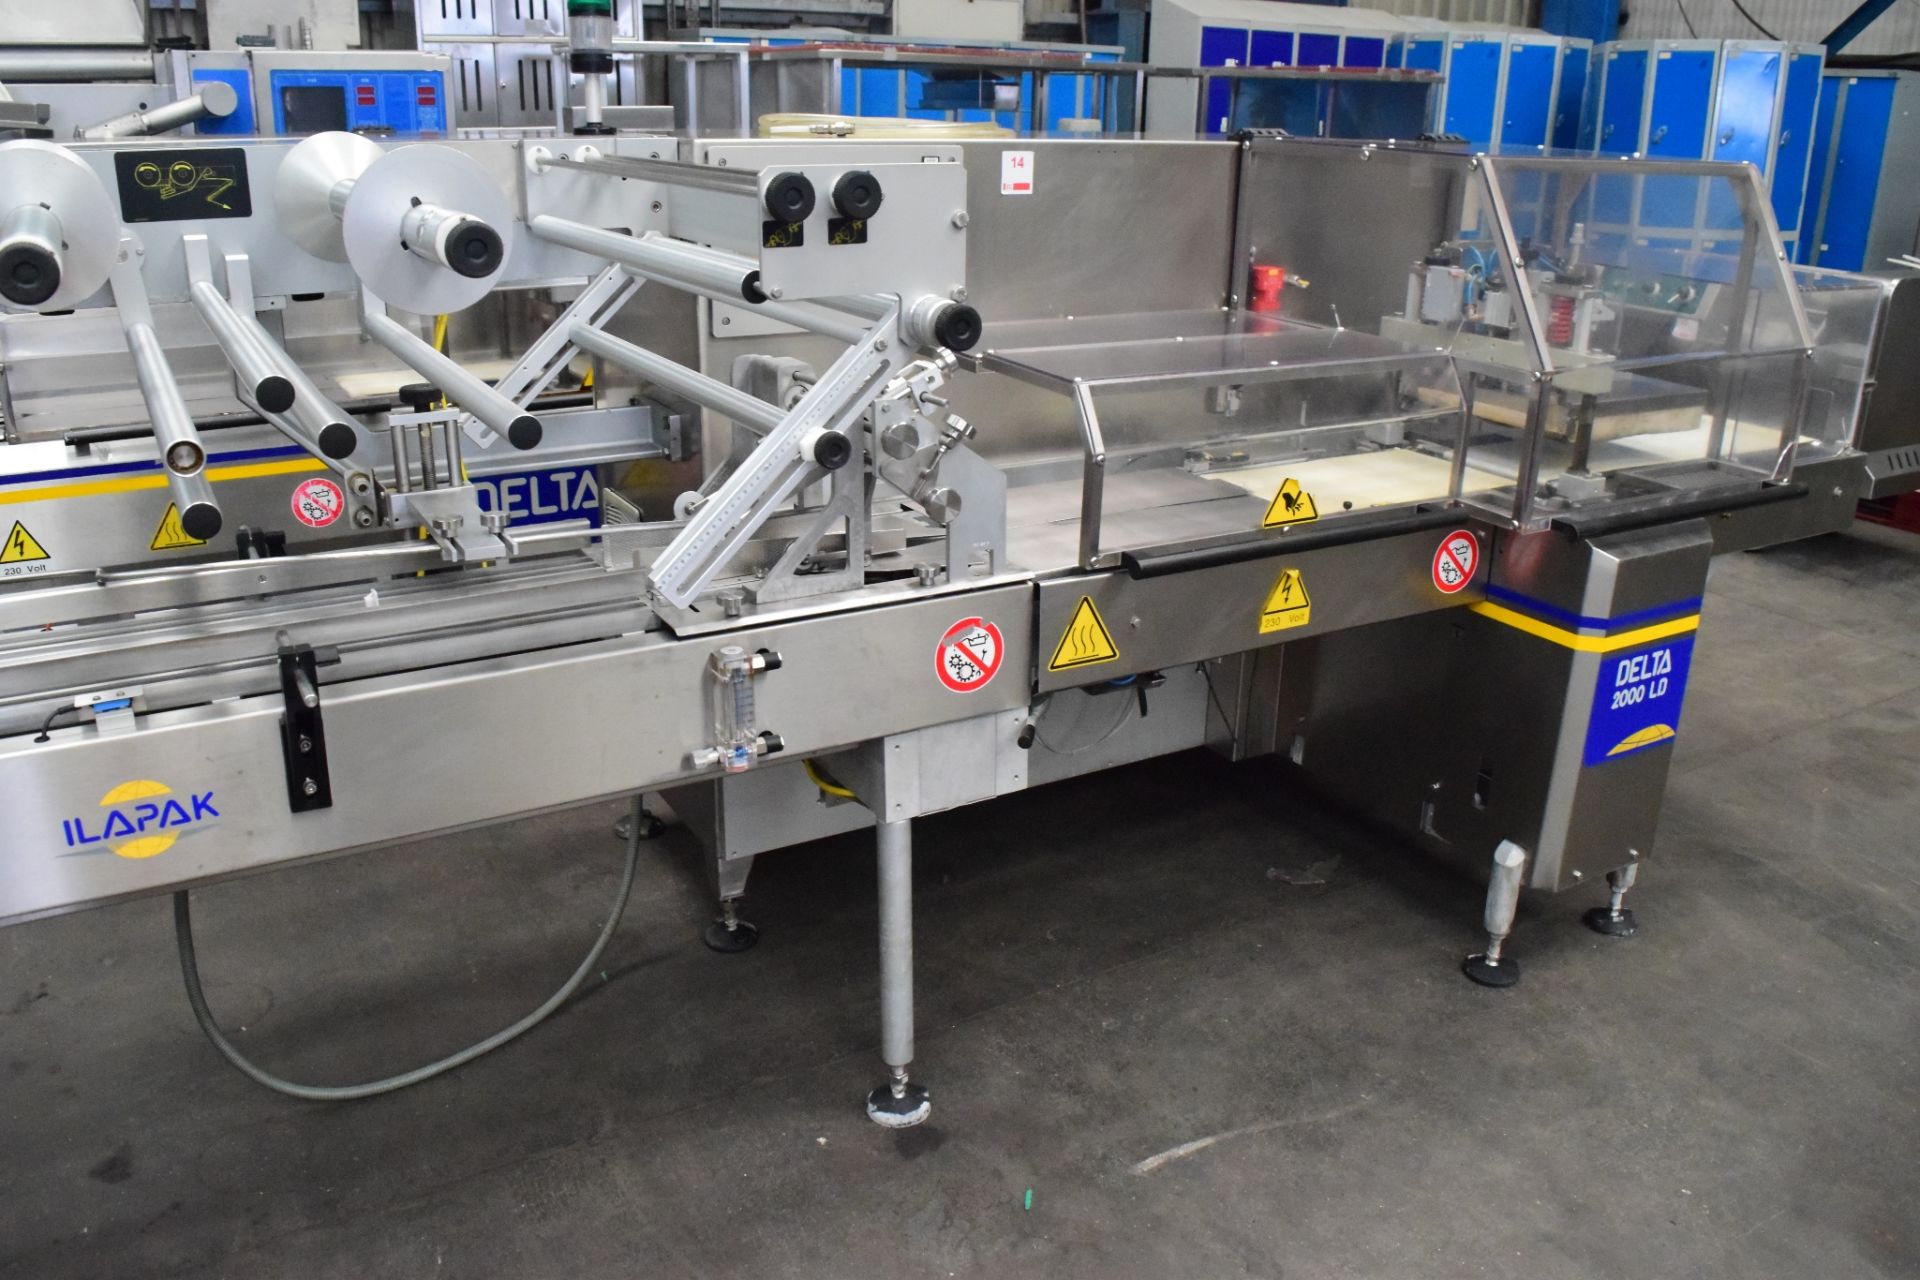 Ilapak Delta 2000LD Flowwrapper. Flexible flow wrapping machine ideally suited for a wide range of - Image 3 of 10